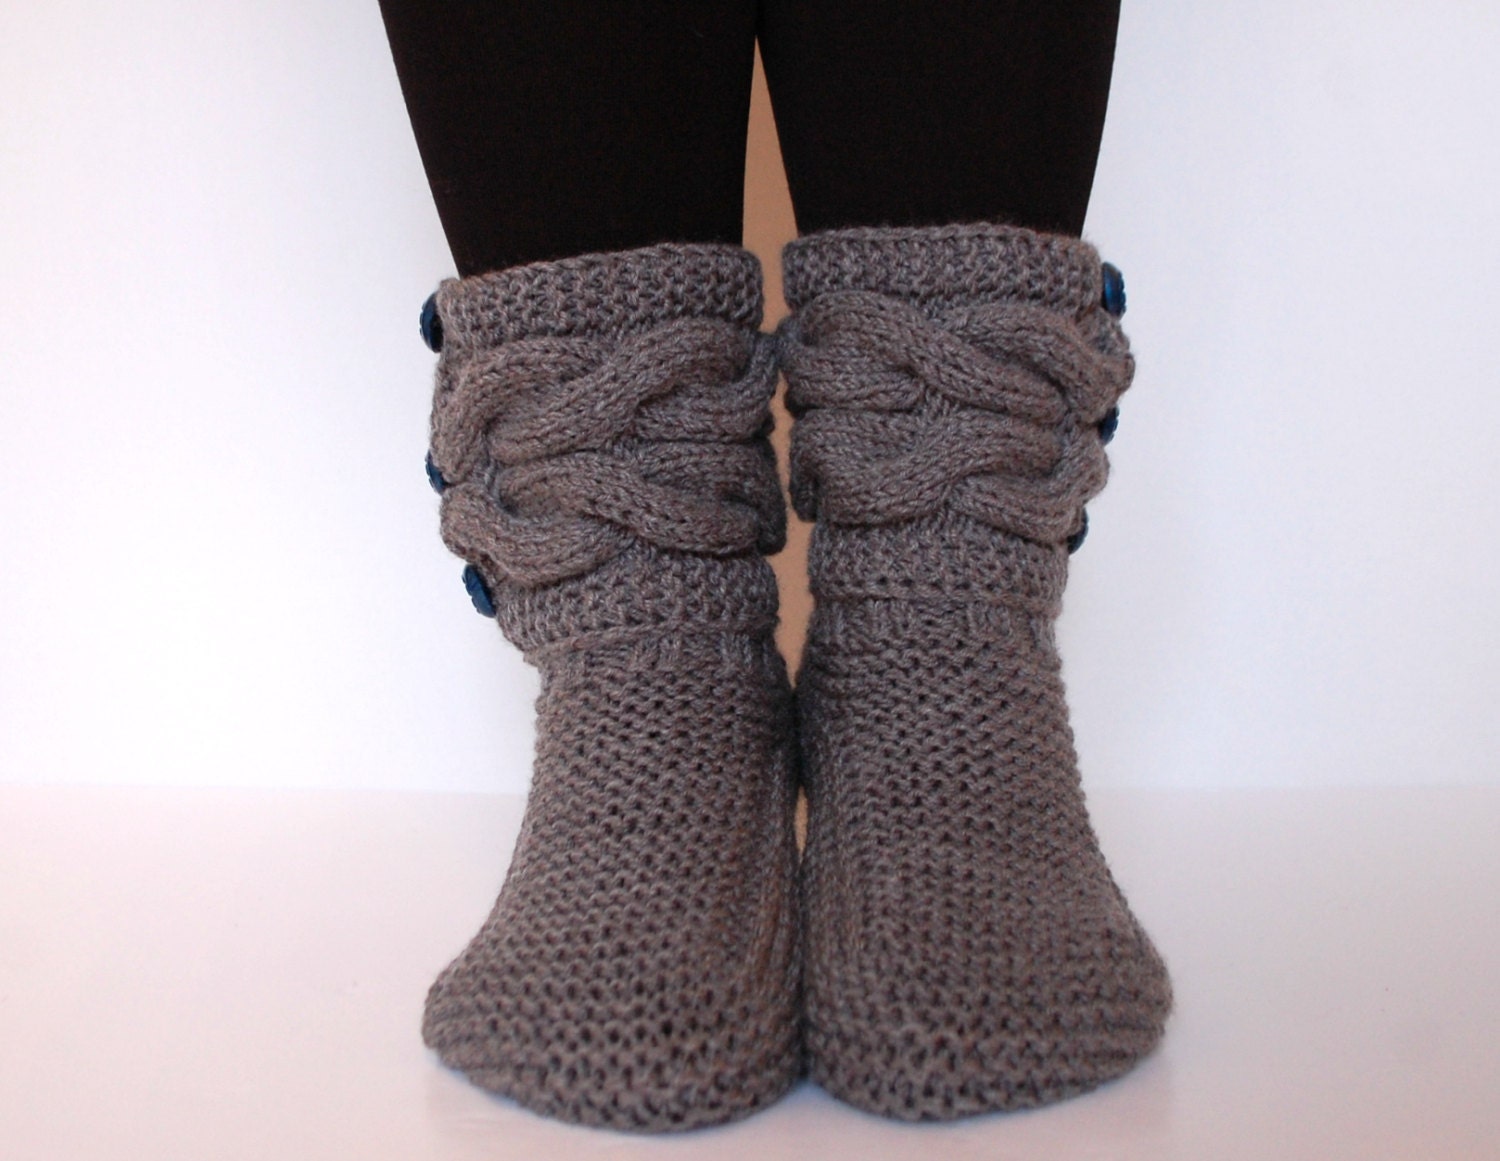 Slipper Boots Knitted Slippers Knitted Socks Wool - Etsy